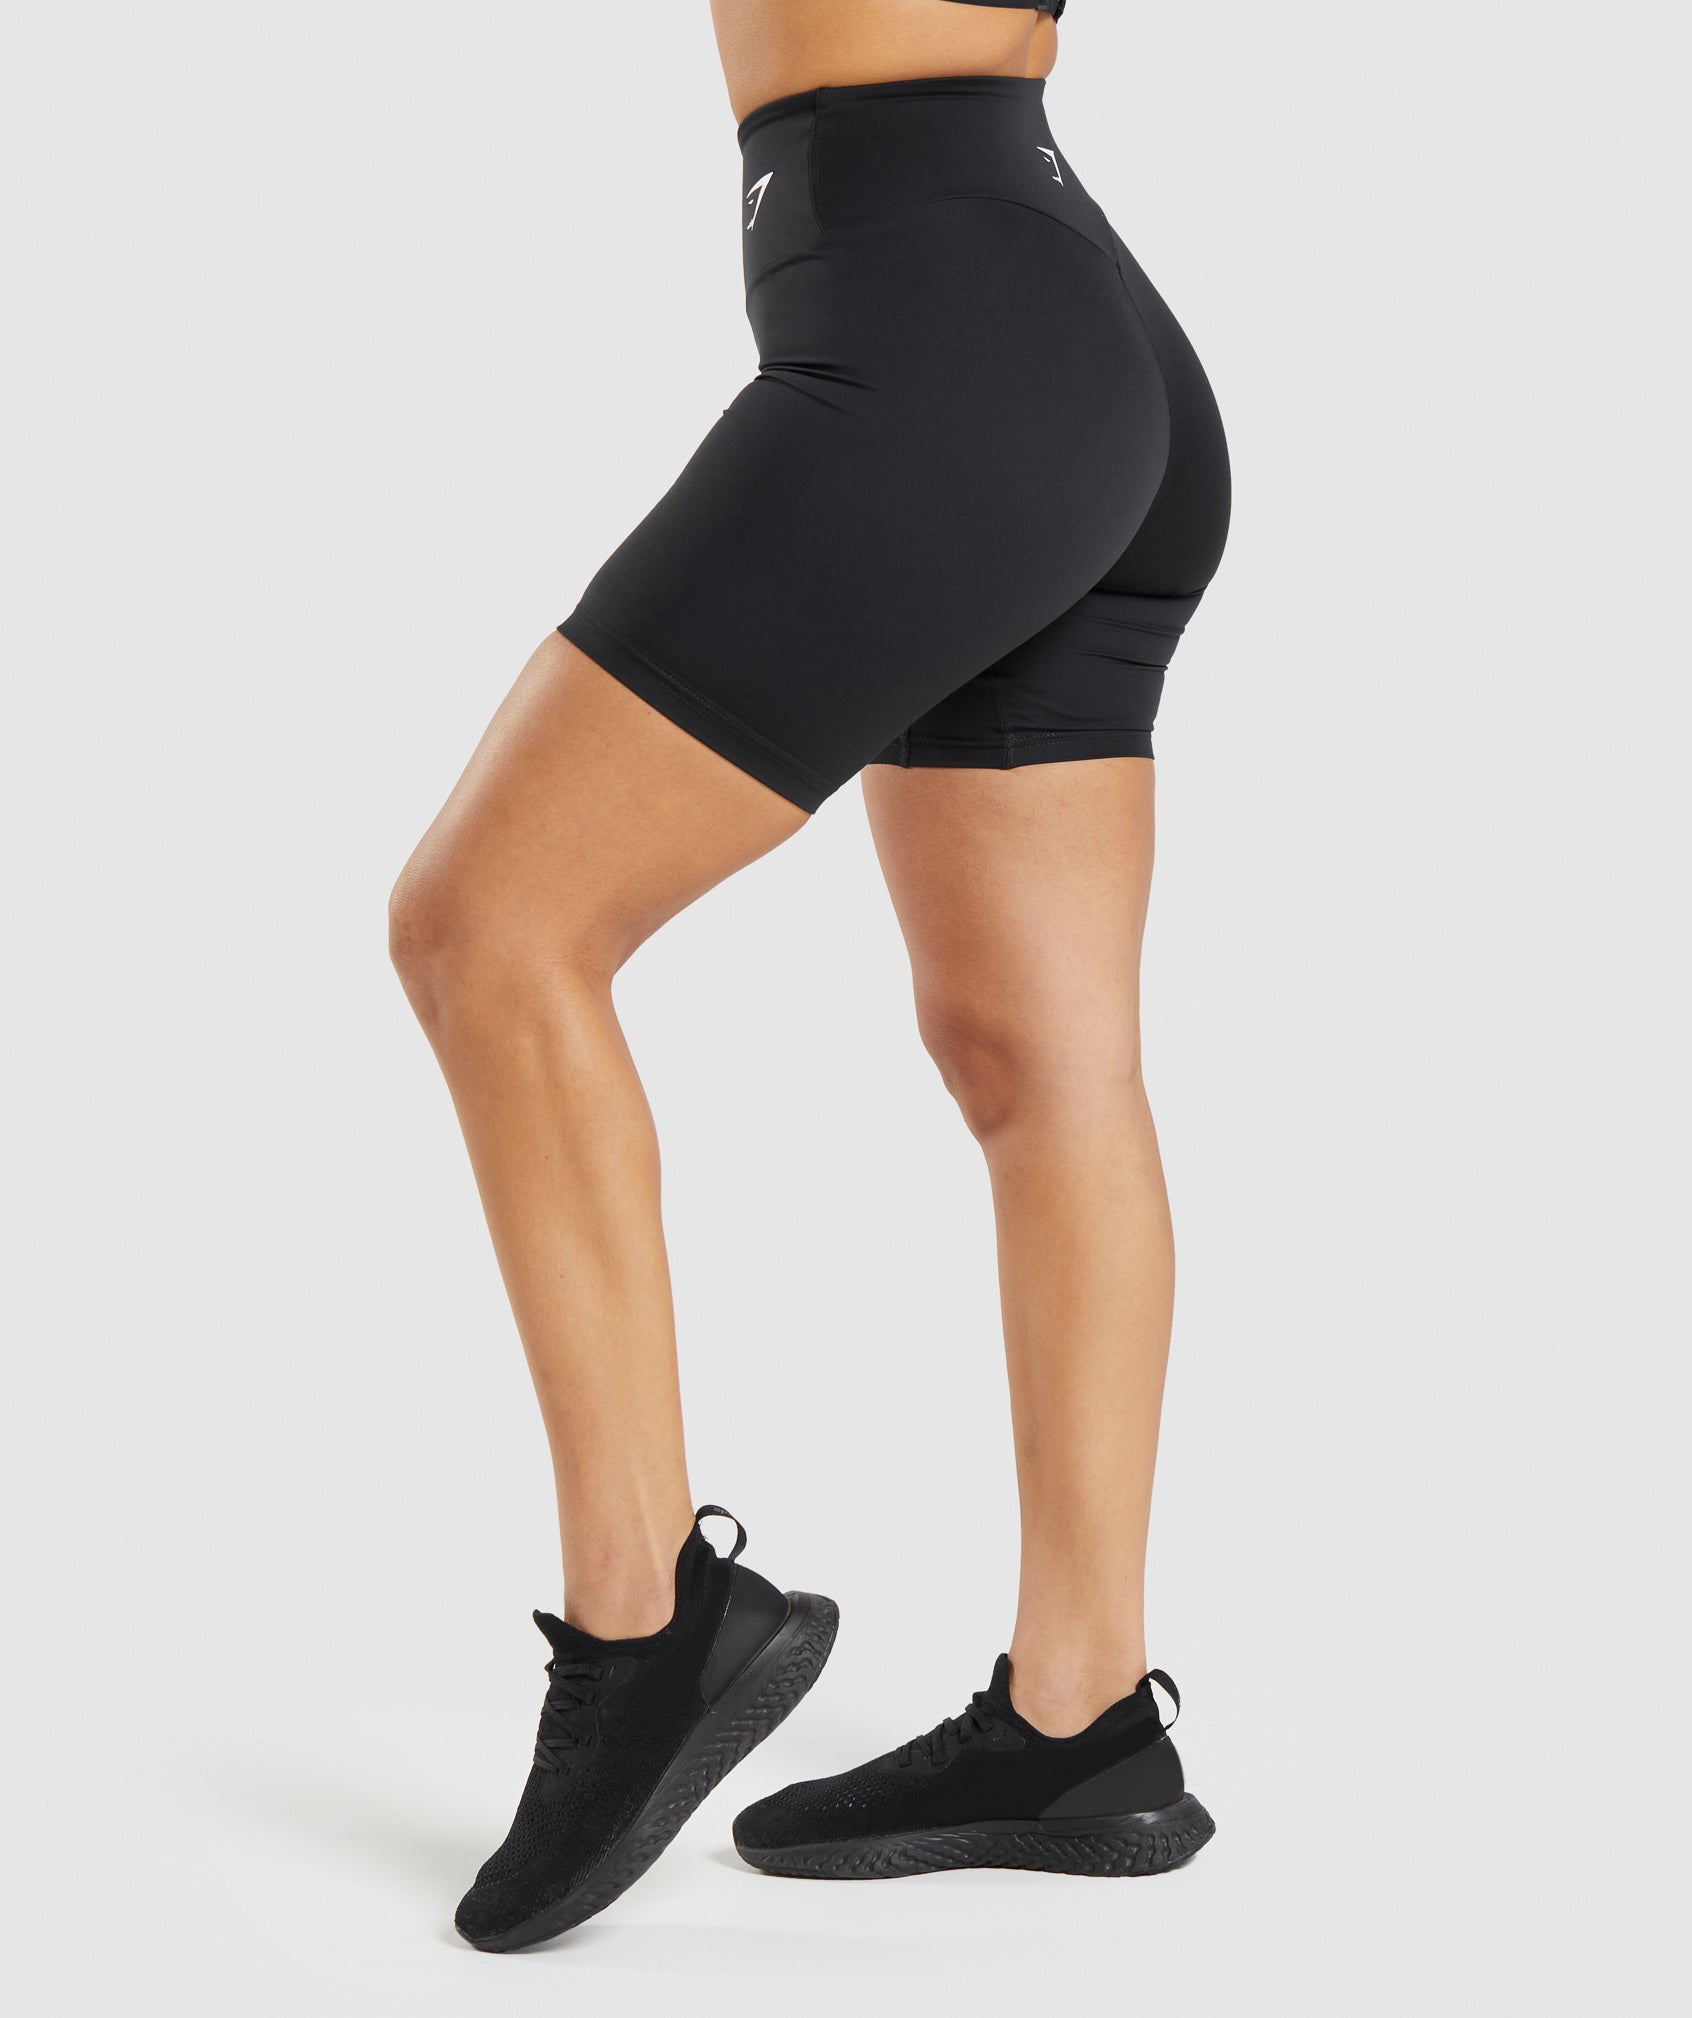 Gymshark Rest Day Seamless Cycling Shorts - Black